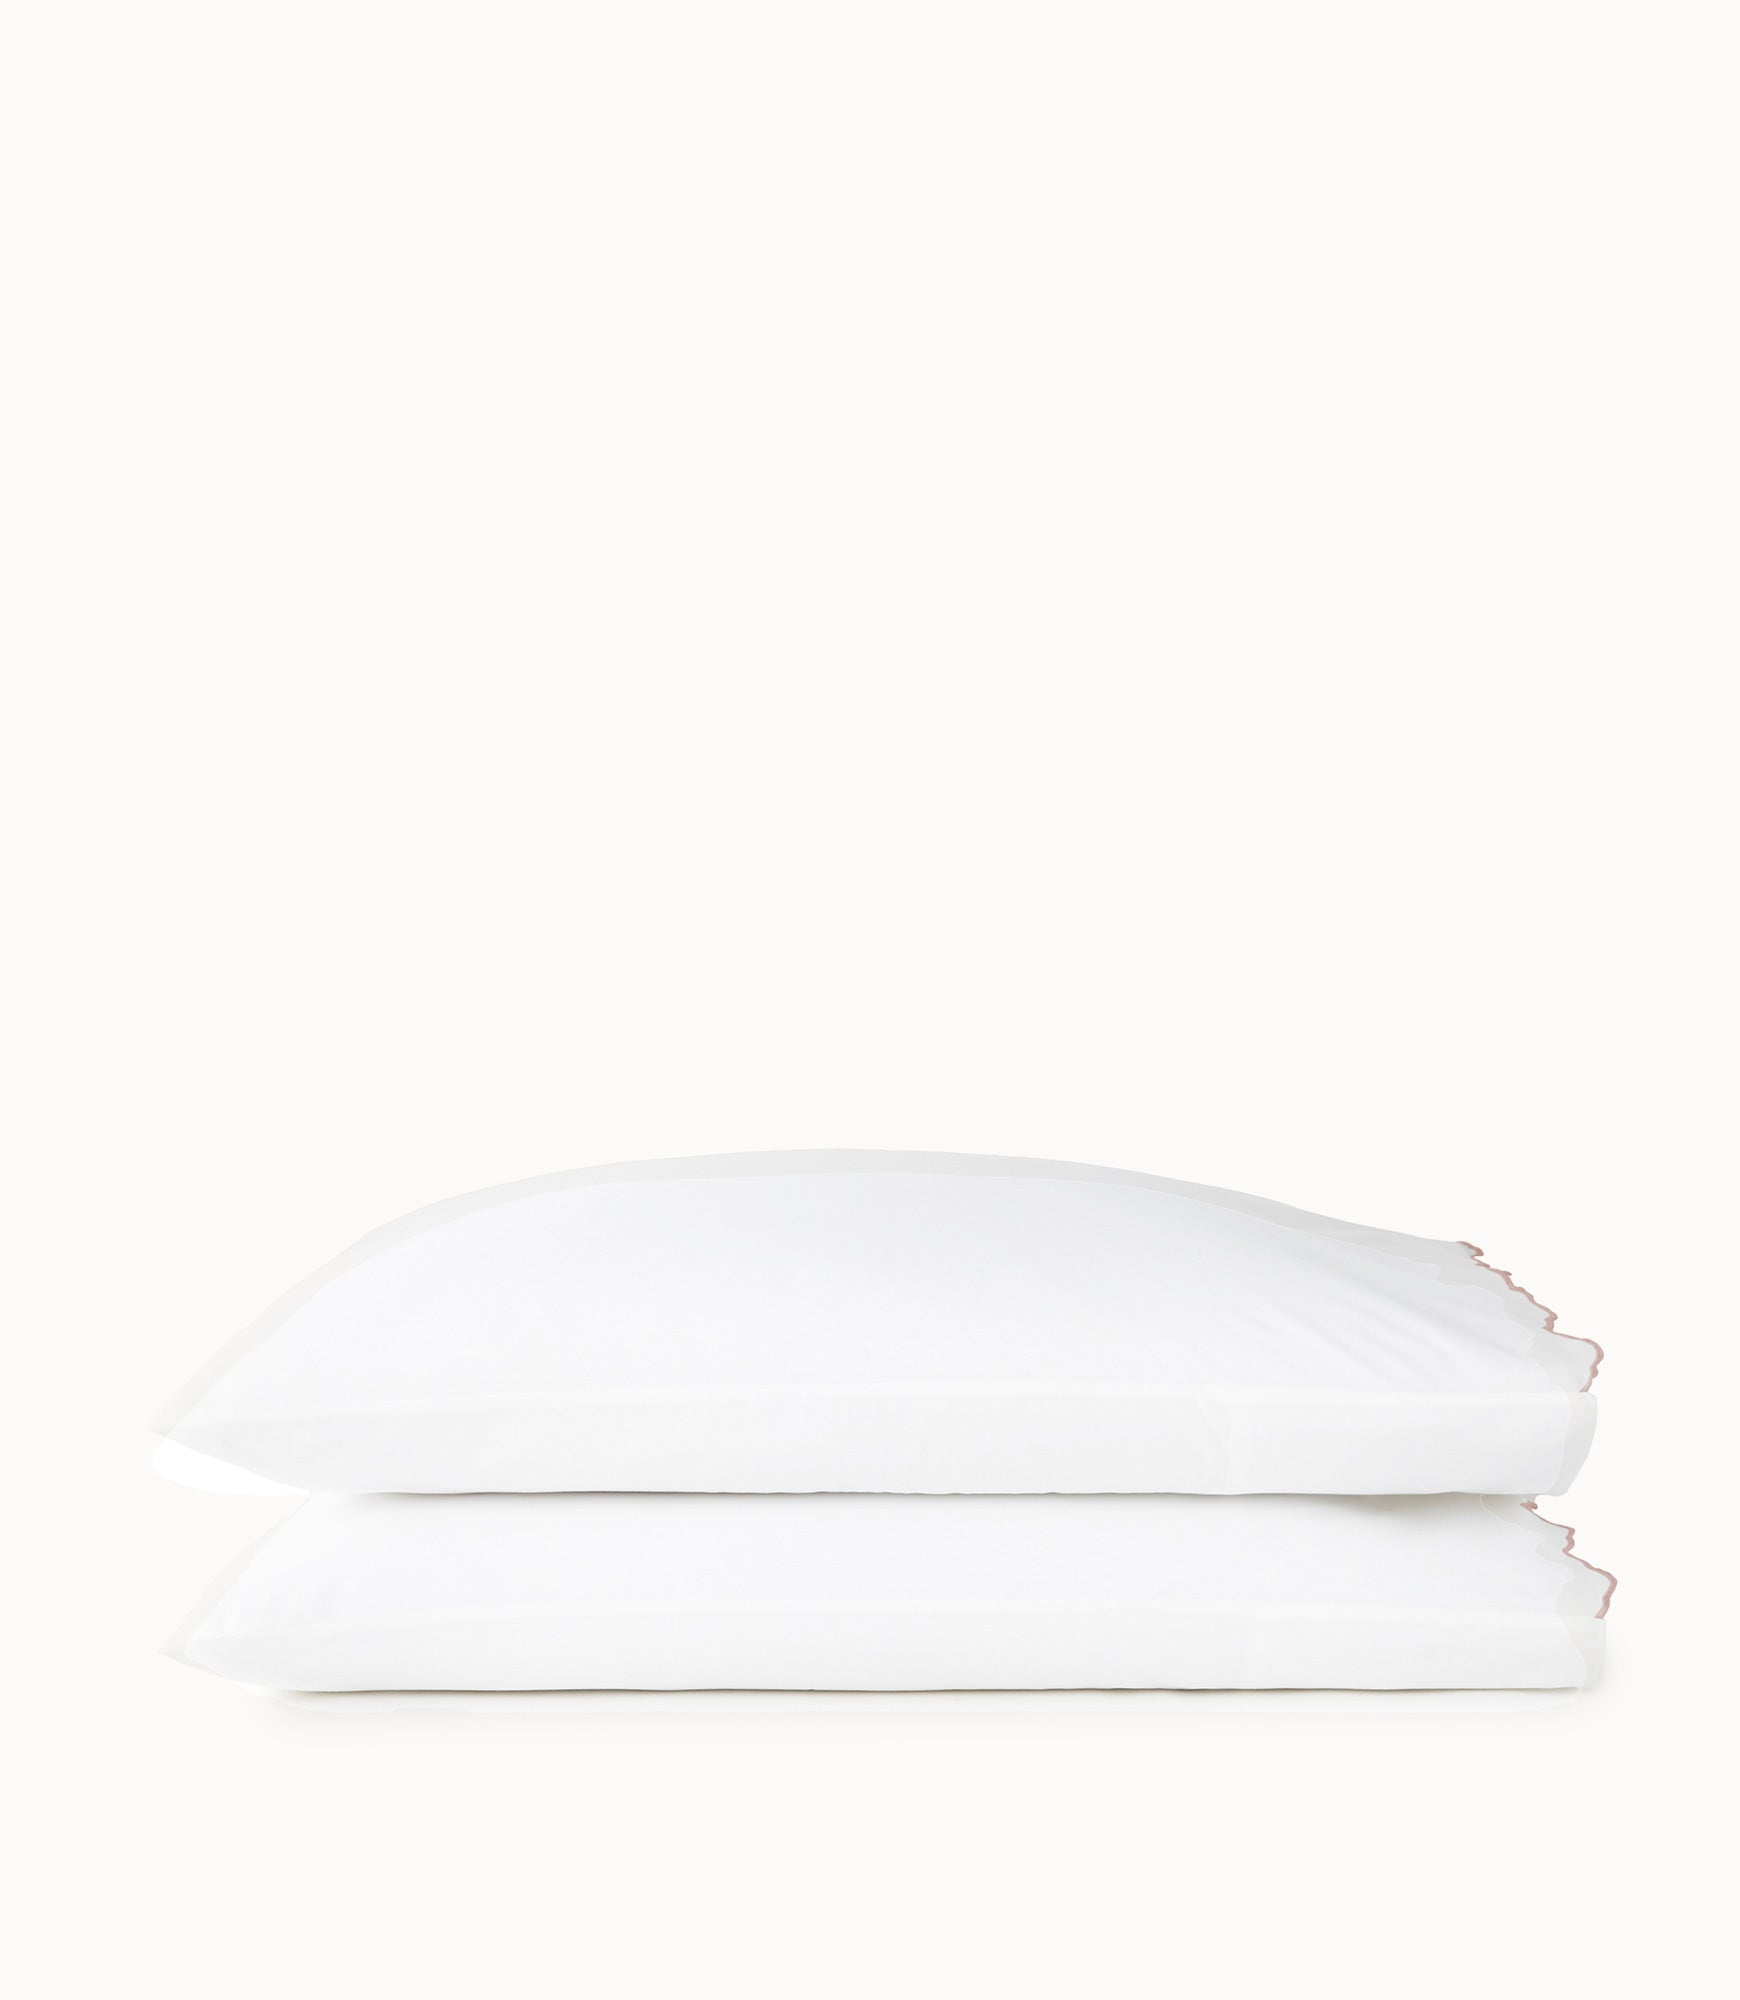 Urban Scallop Pillow Cases stacked Nude